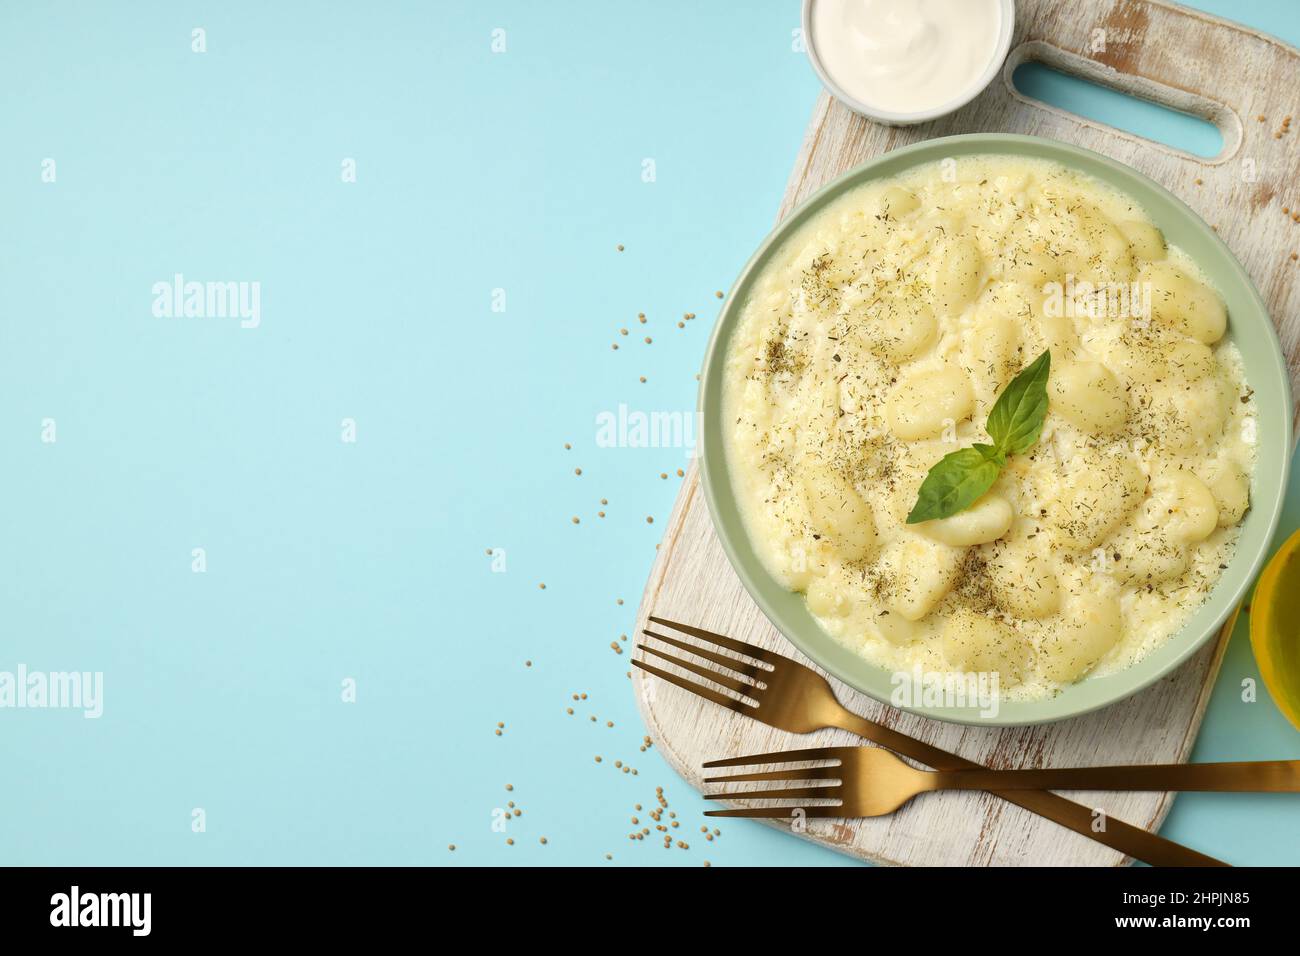 Concept of tasty food with gnocchi, space for text Stock Photo